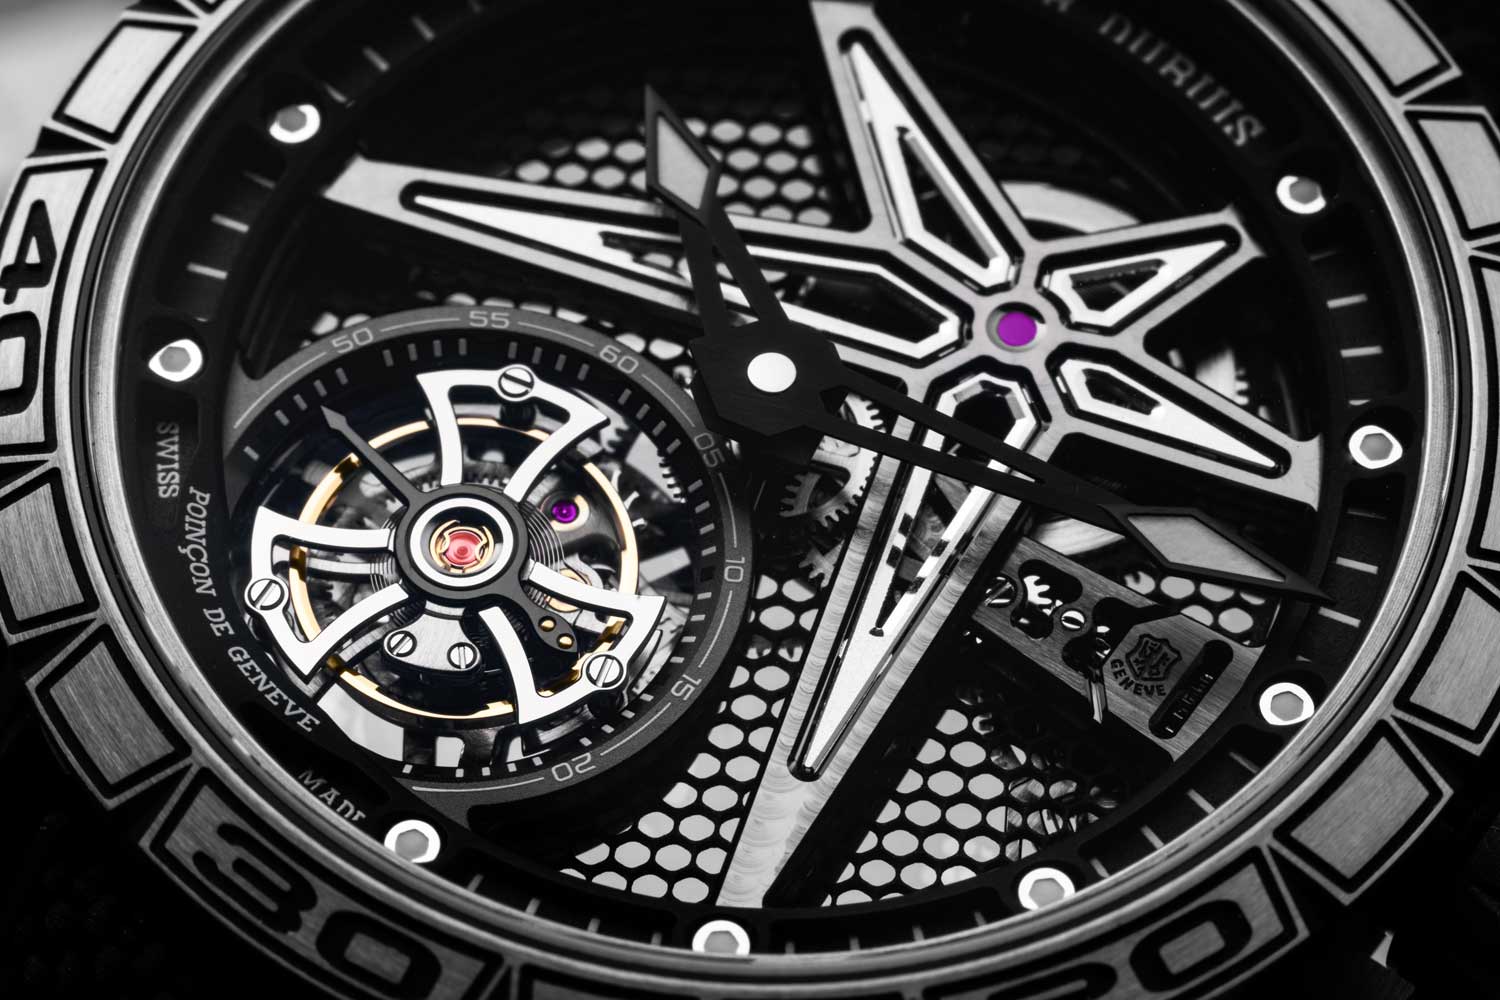 The tourbillon in RD510SQ beats at 3 Hz, and the calibre has a total of 179 components.